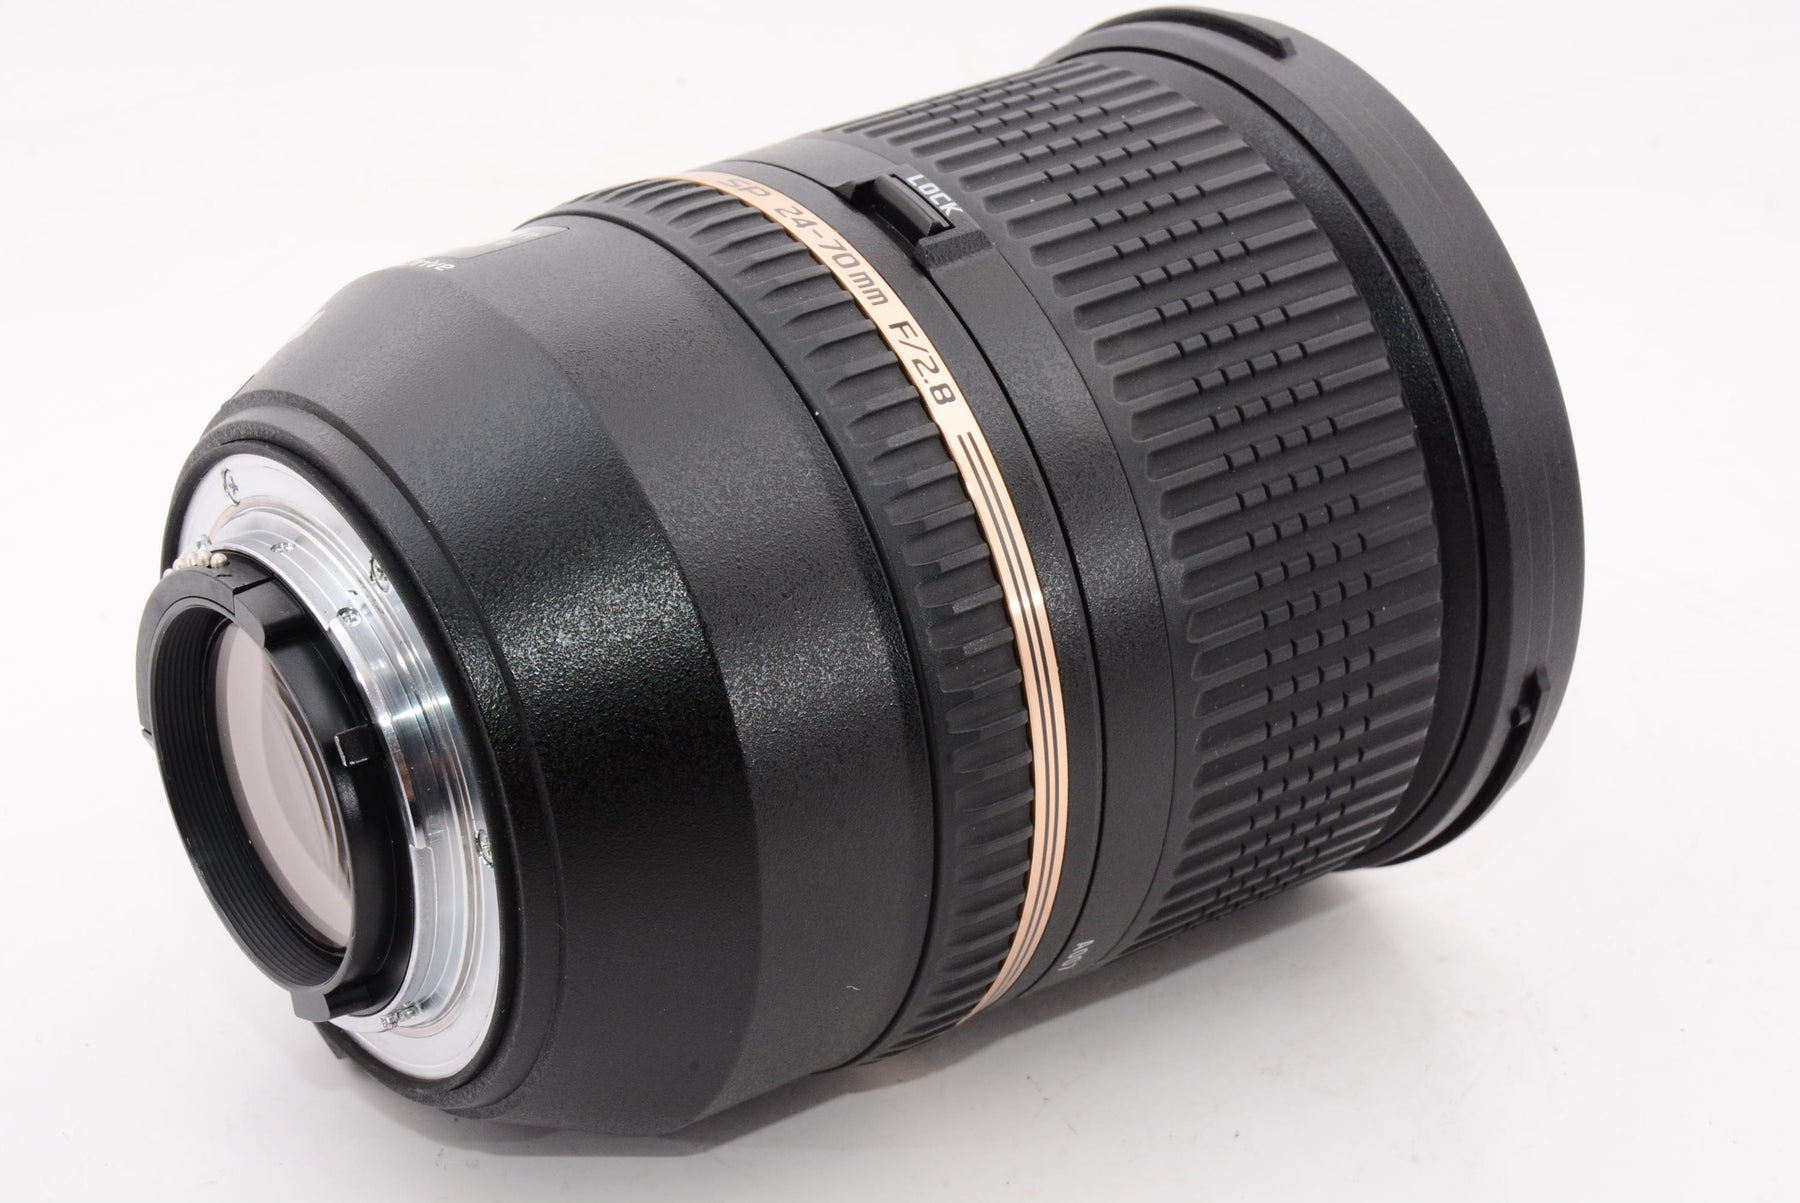 TAMRON ズームレンズ SP 24-70mm F2.8 ニコン用 A007N-